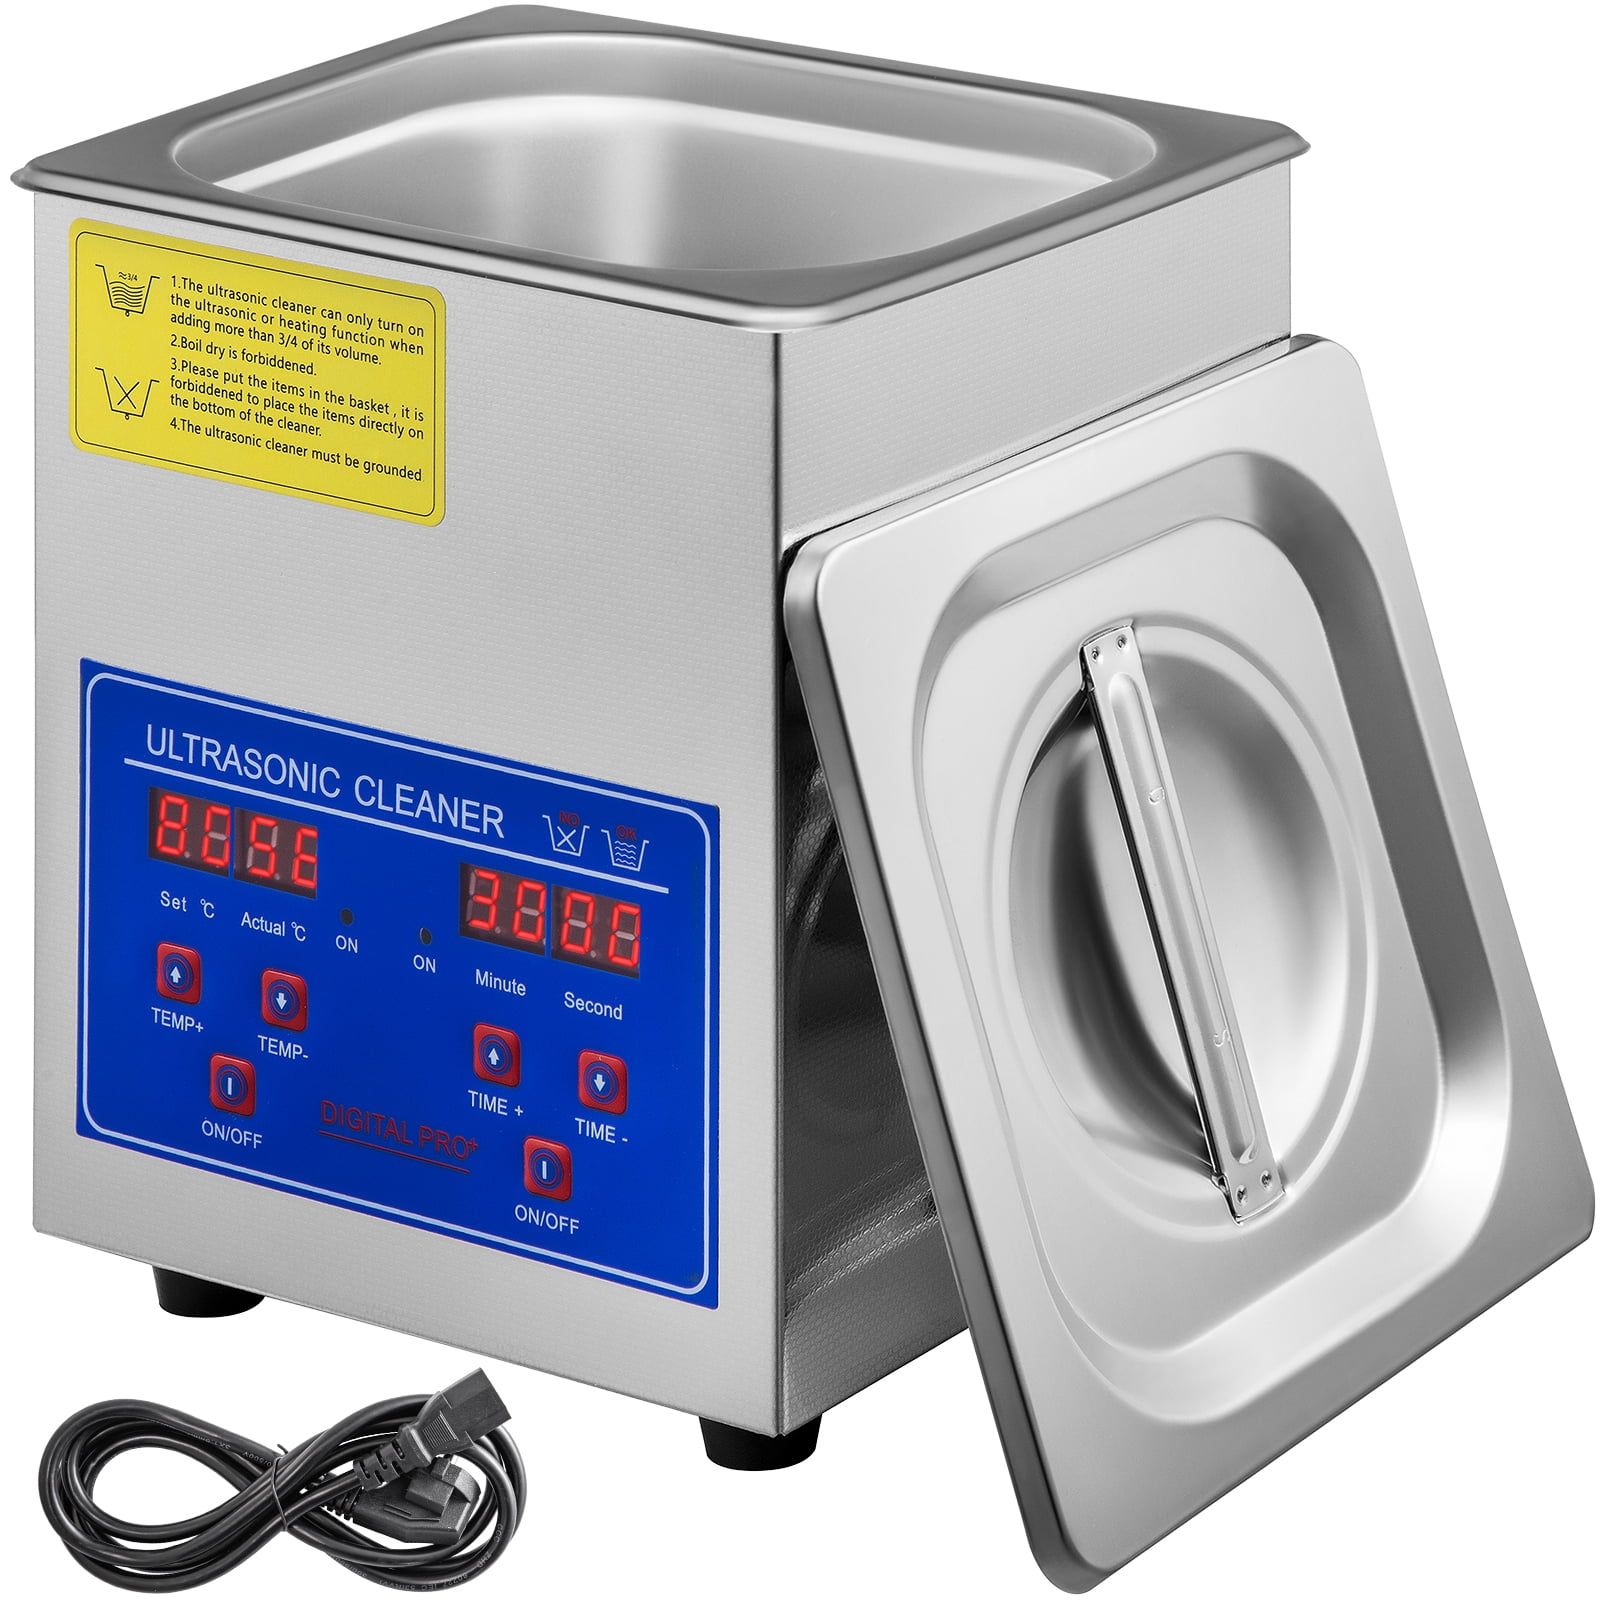 How to Choose an Ultrasonic Cleaning Machine